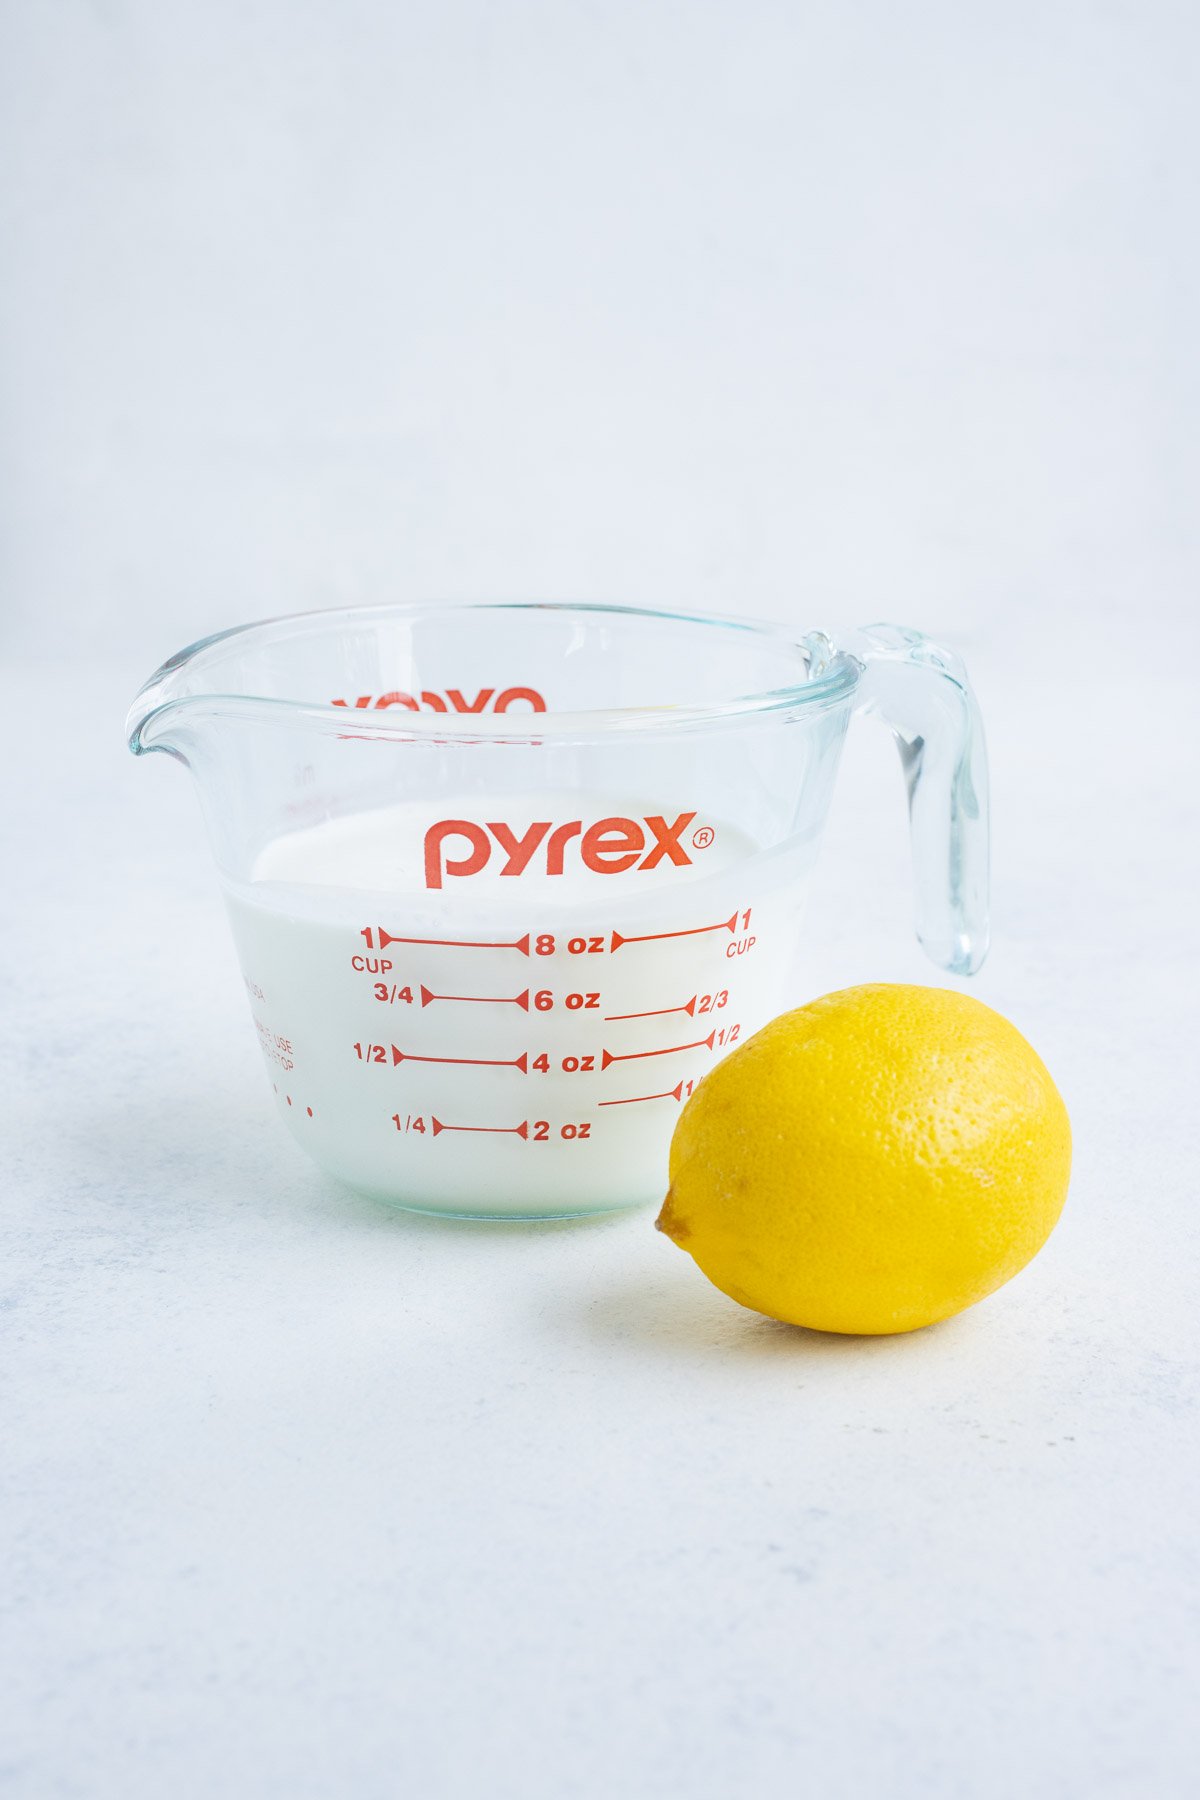 Milk in a glass measuring cup with a lemon on the side.